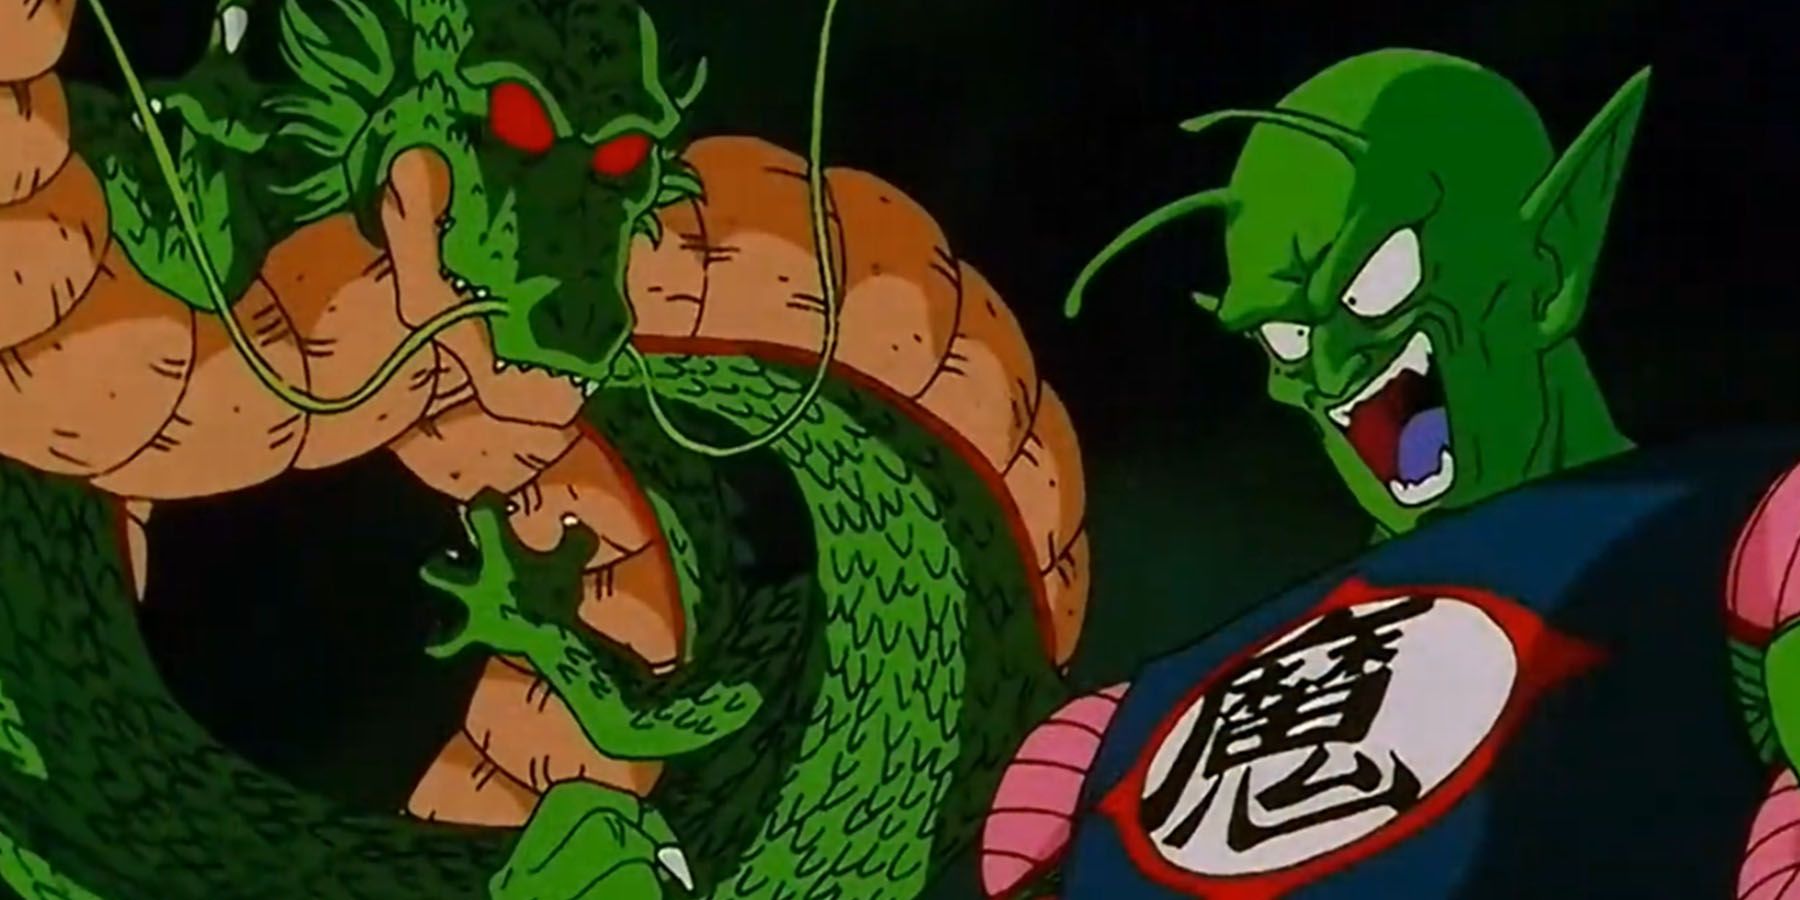 King Piccolo's youth is restored by Shenron through the Dragon Balls in Dragon Ball